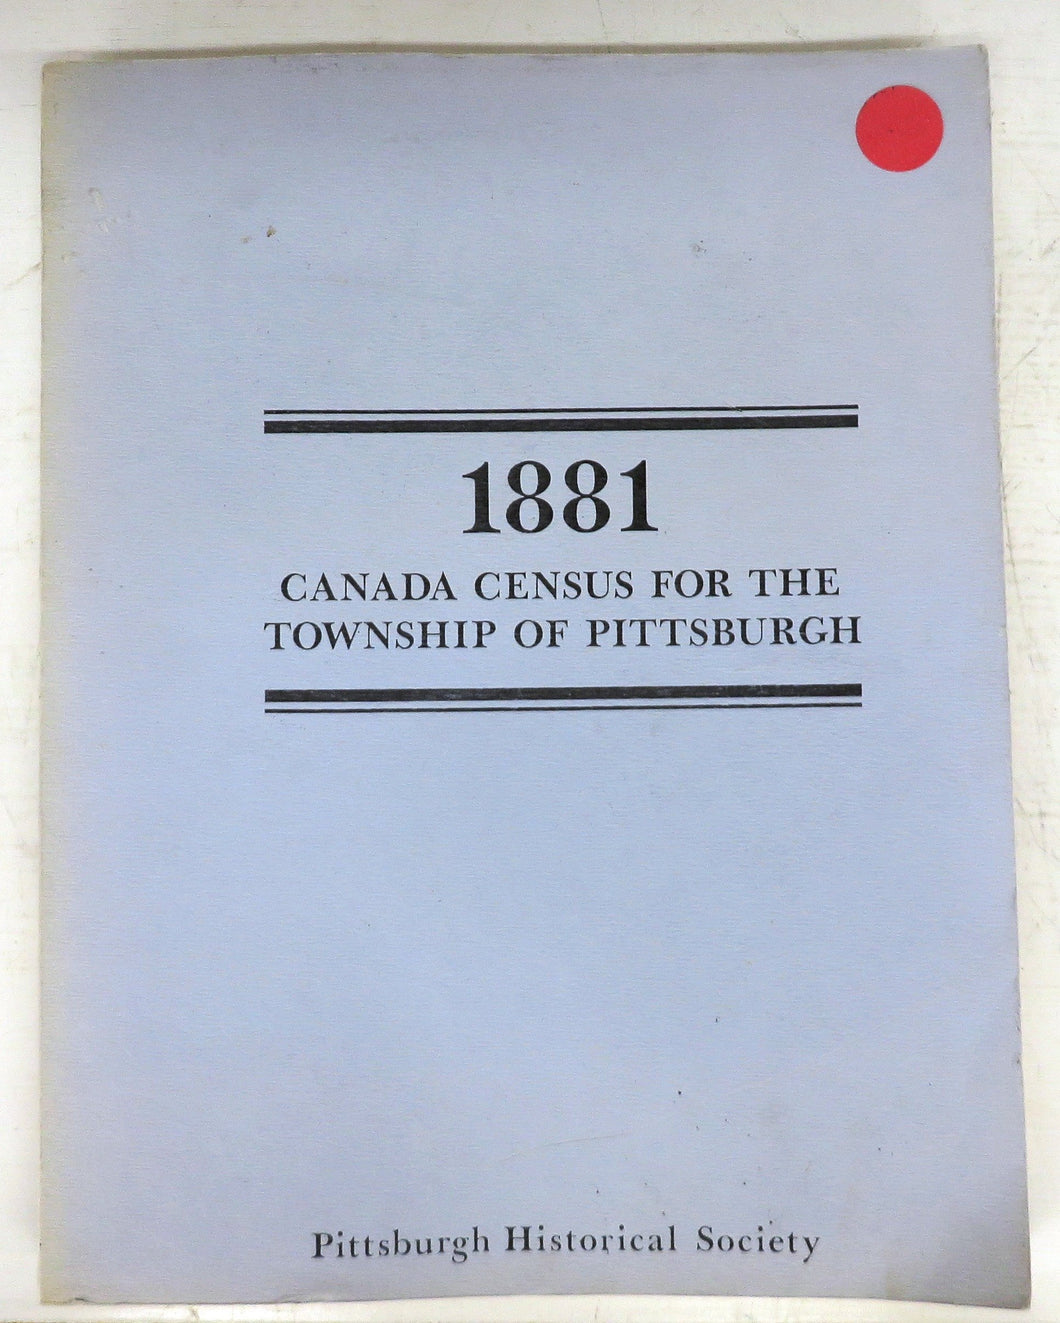 1881 Canada Census for the Township of Pittsburgh